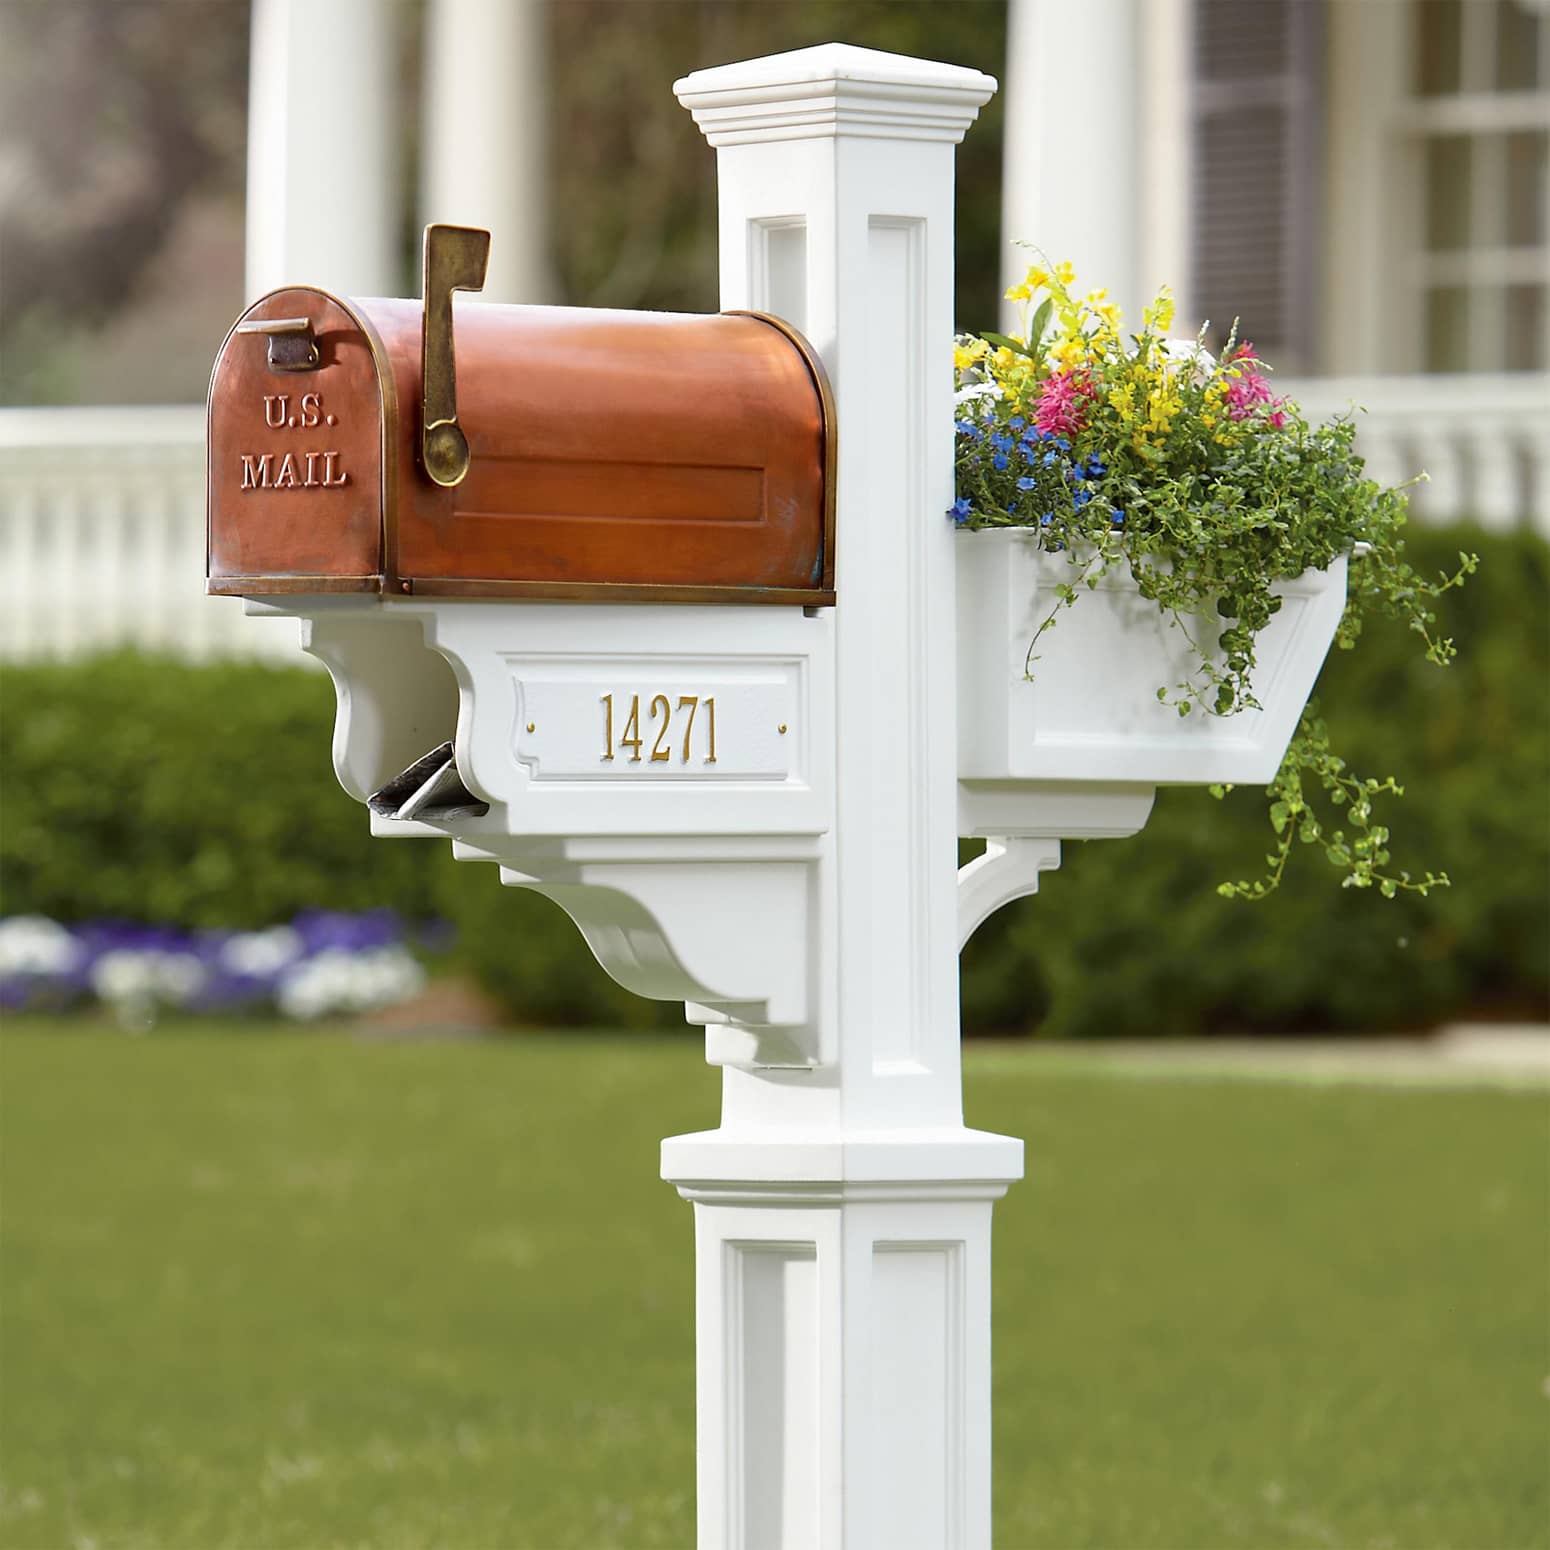 Signature Plus Mail Post With Copper Mailbox, Flower Box, and Newspaper Holder